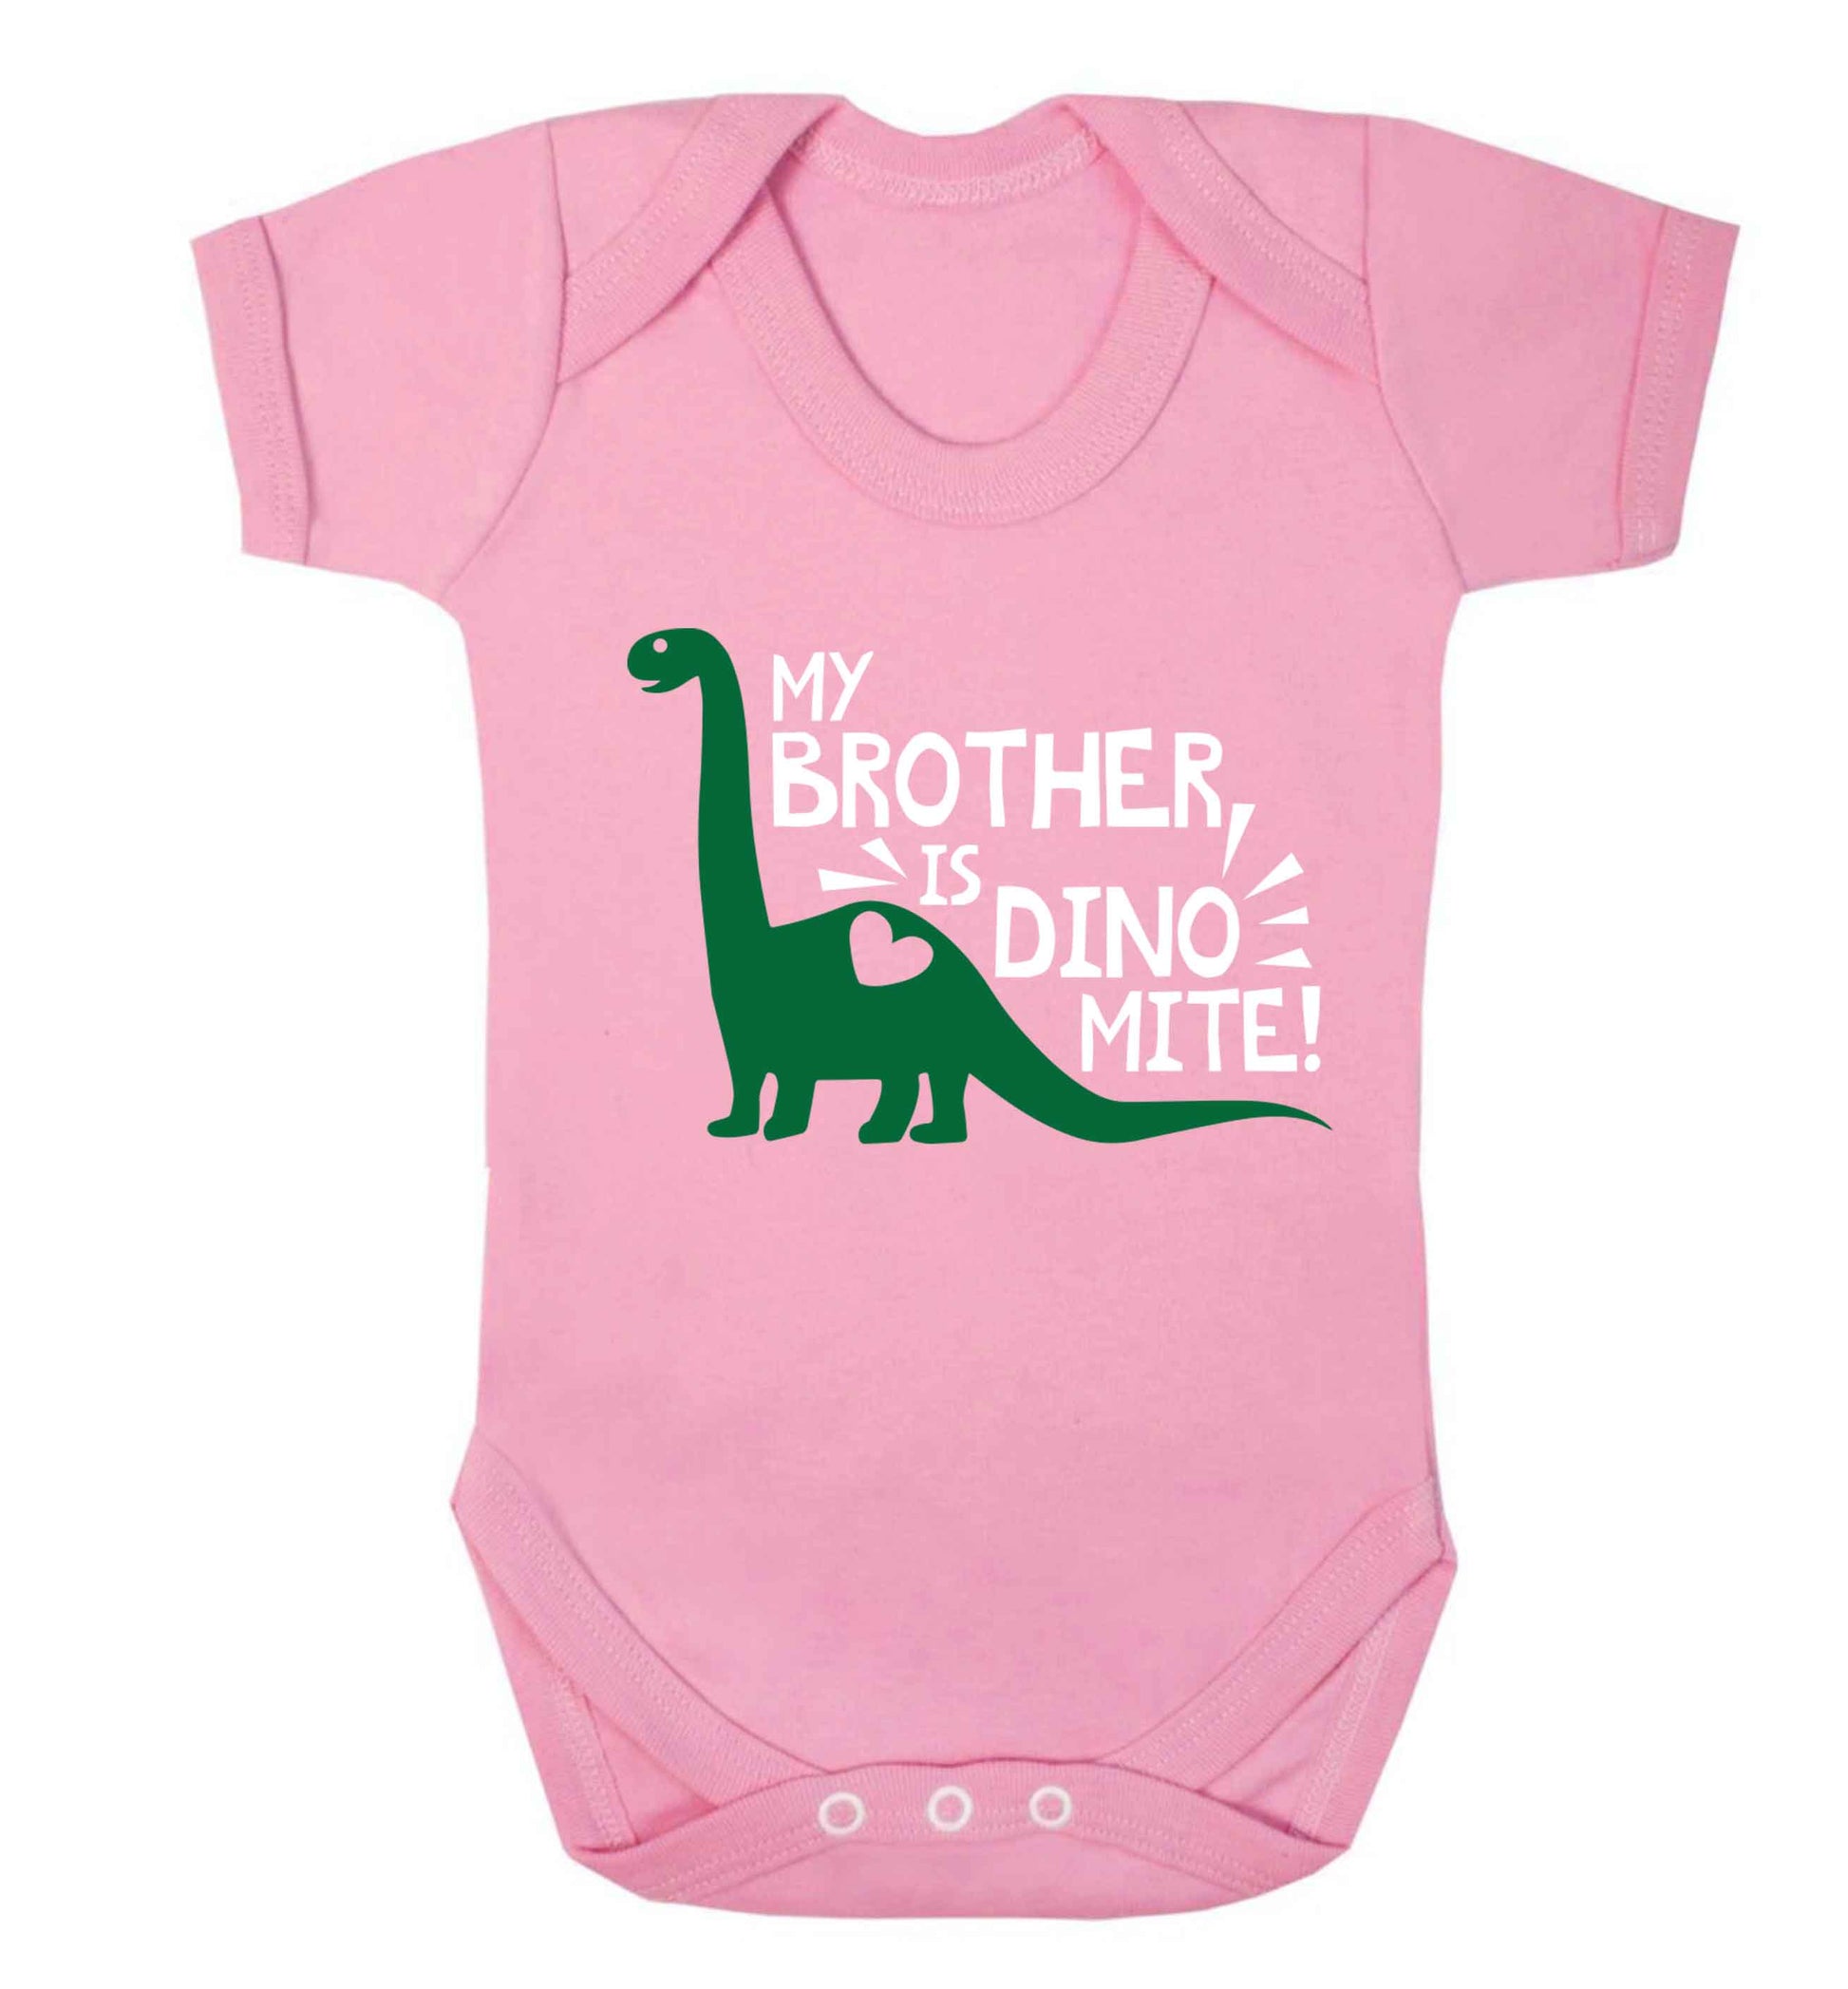 My brother is dinomite! Baby Vest pale pink 18-24 months